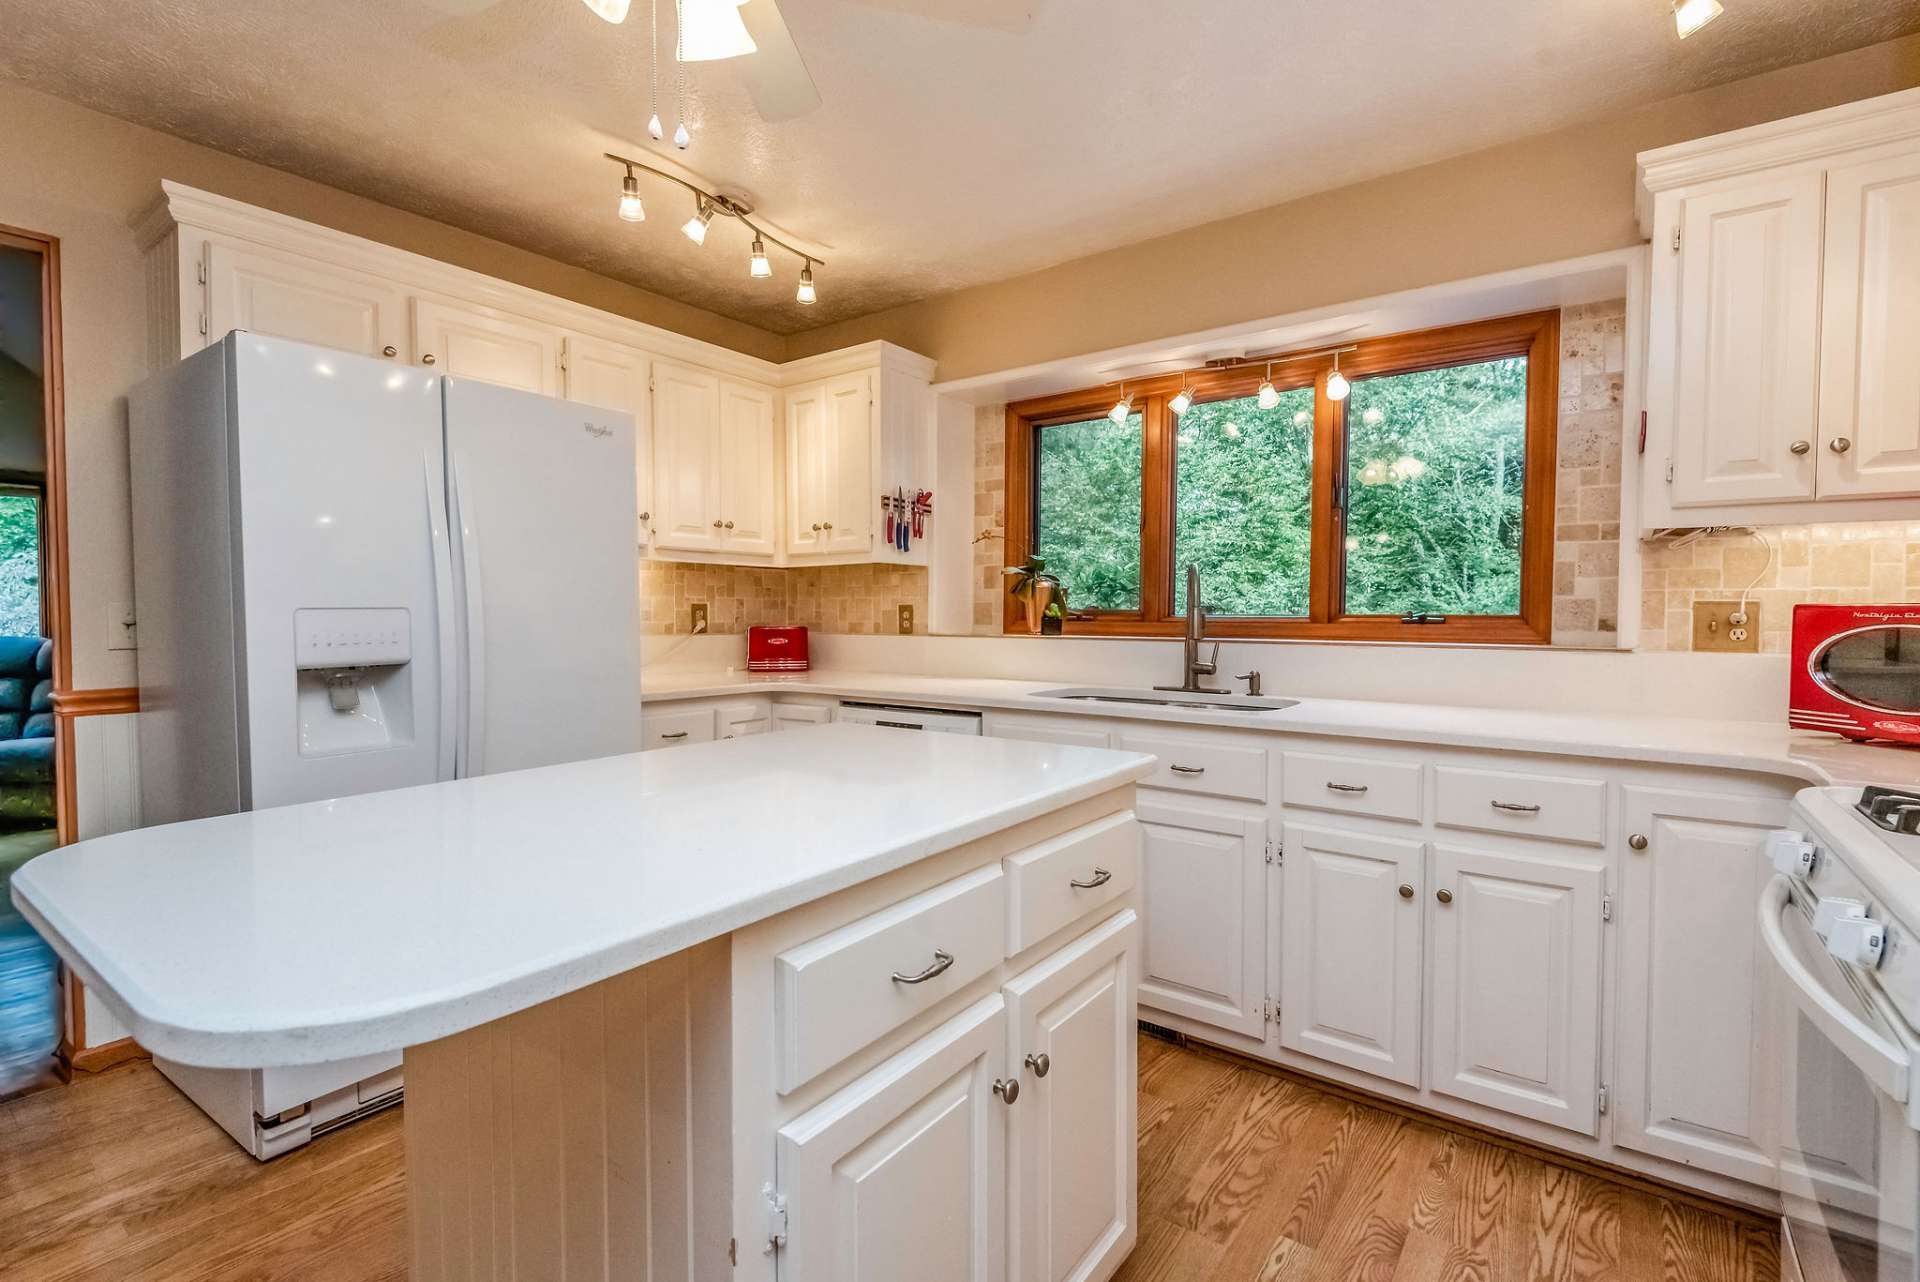 Sellers updated counter tops, appliances, and lighting in kitchen after purchasing the home.